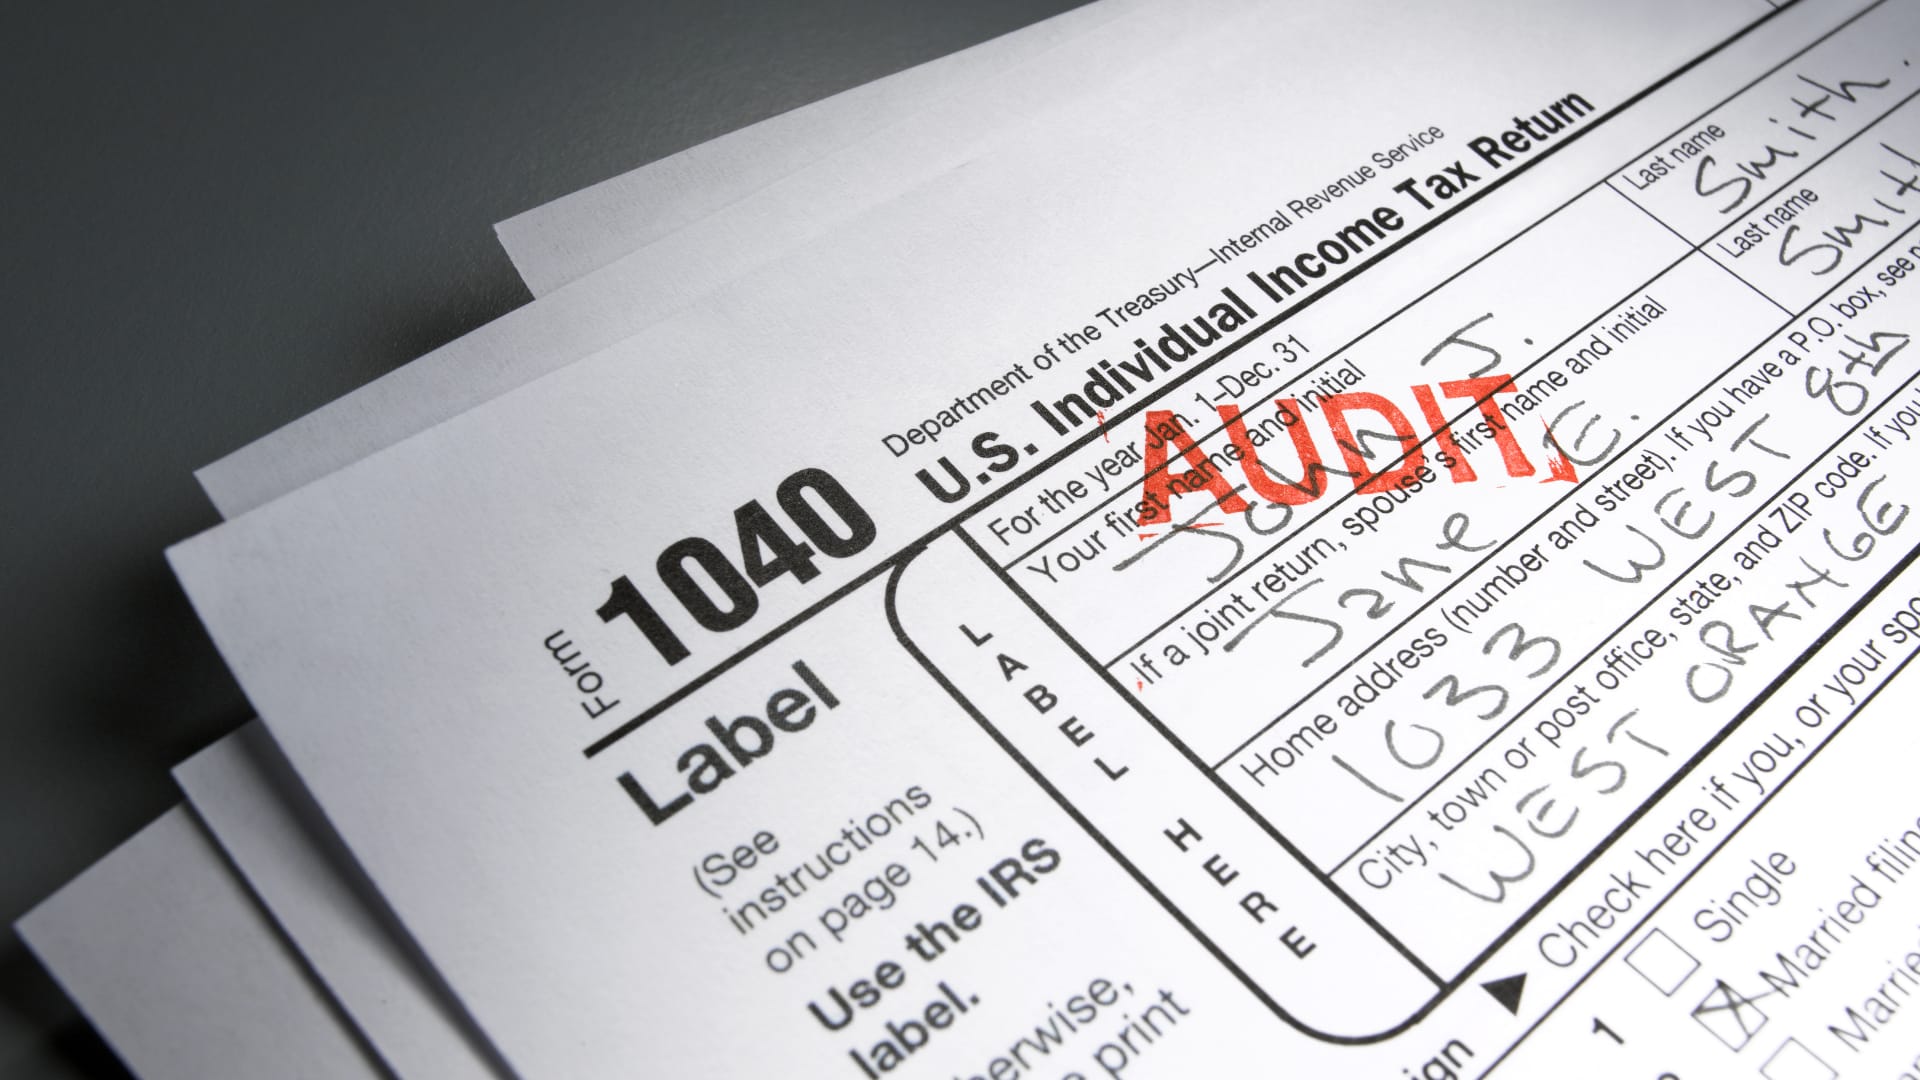 With the IRS hiring more employees, here’s who agents may target for audits